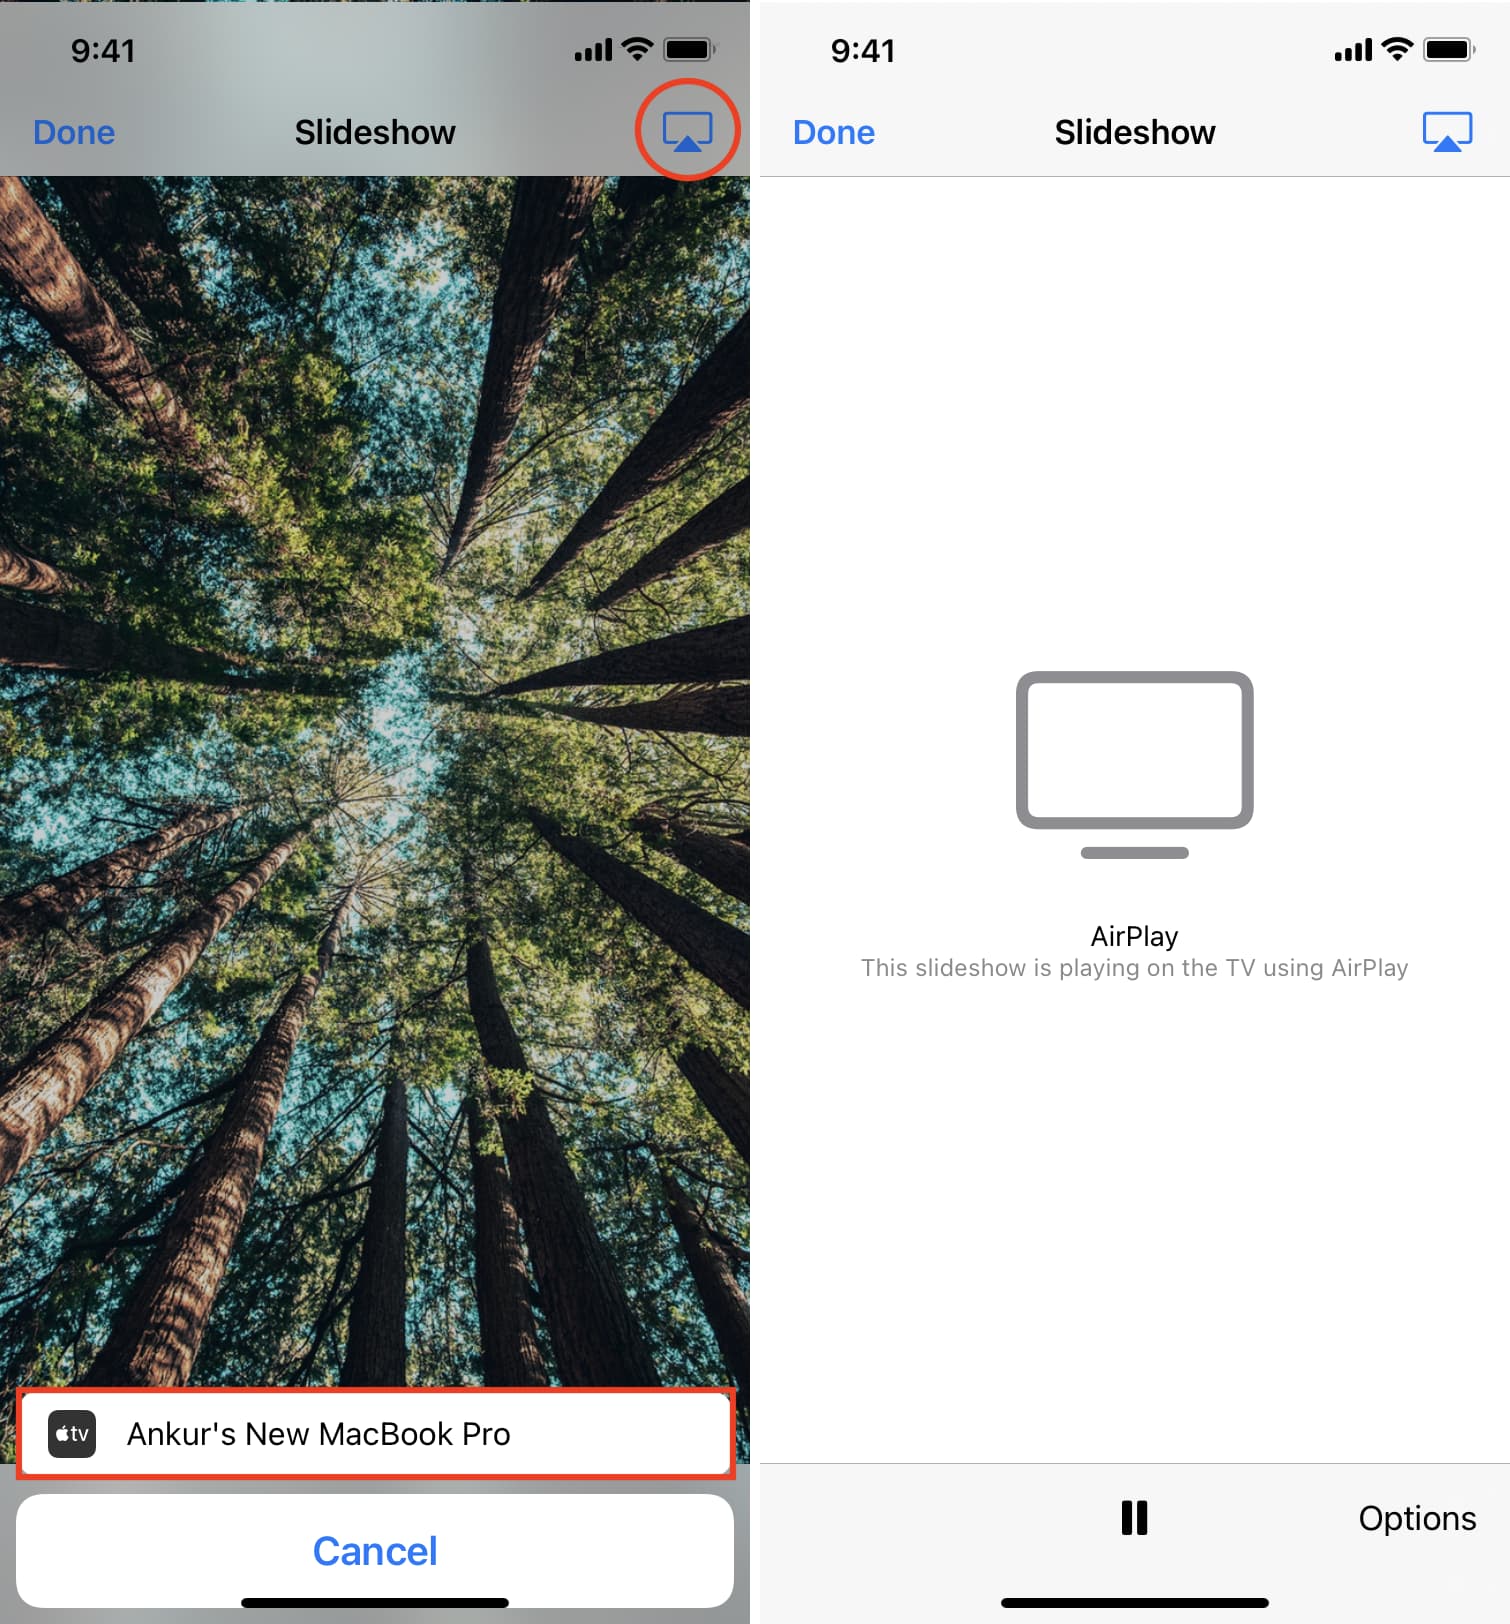 AirPlay photos and videos slideshow to another device from your iPhone